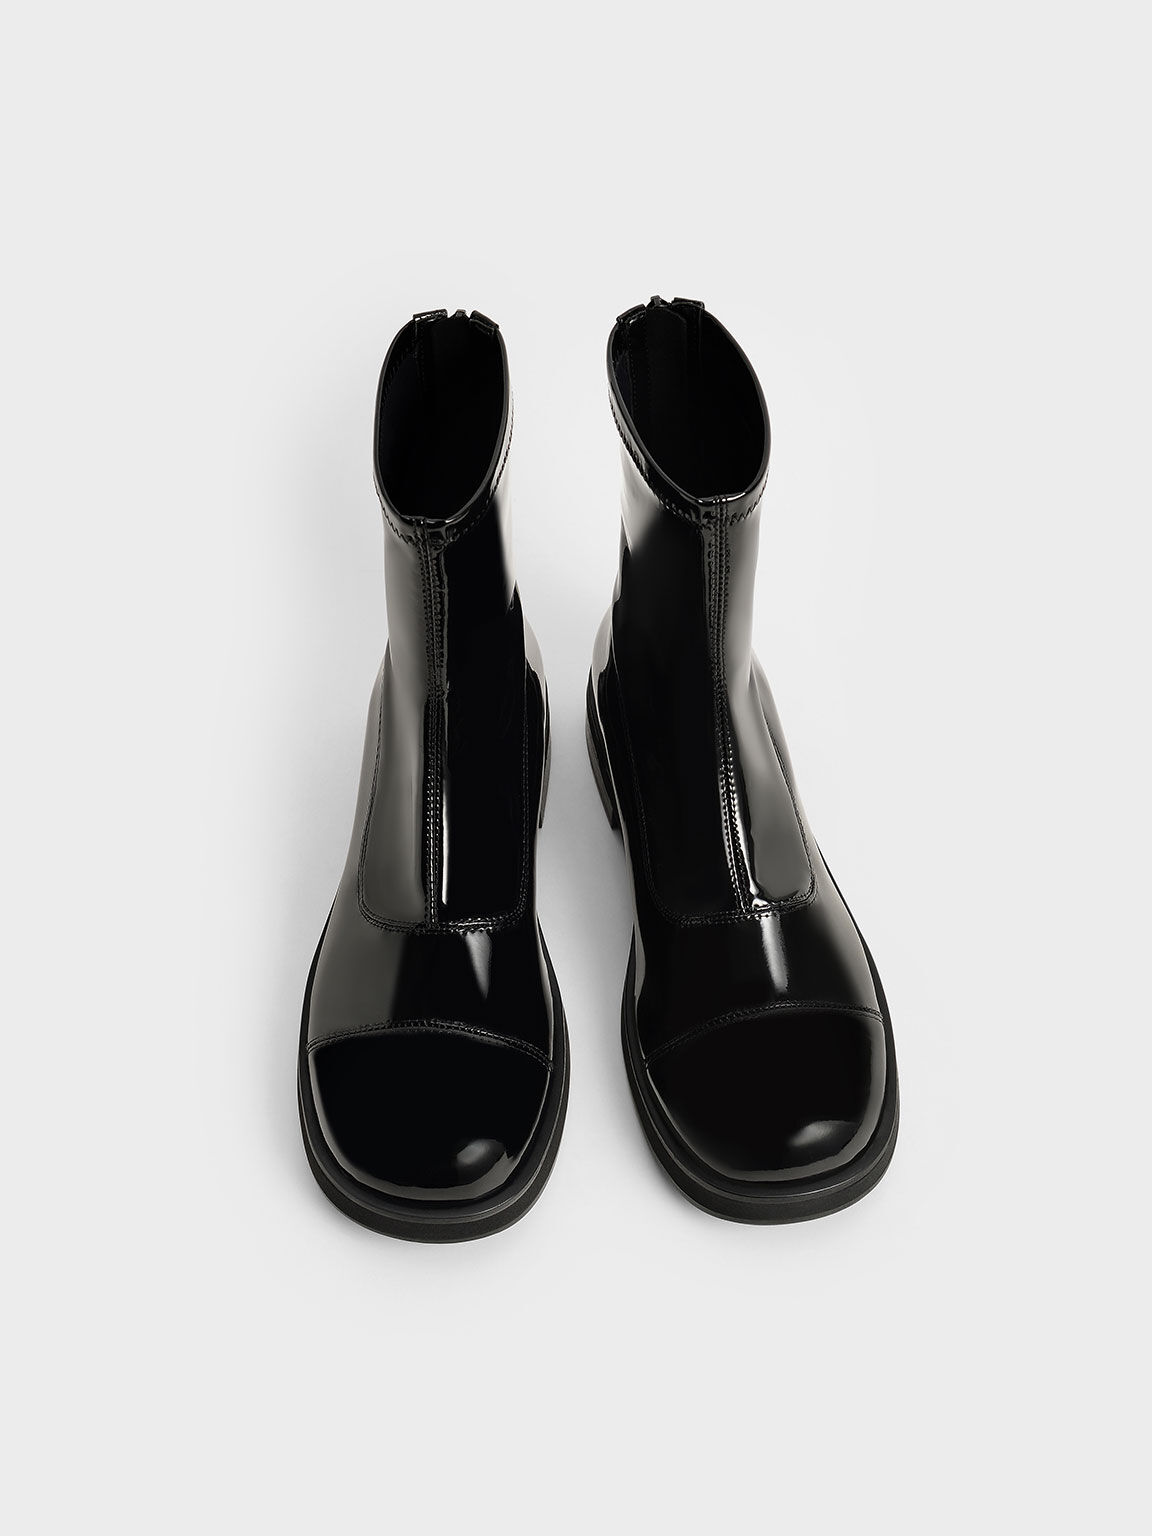 Patent Round Toe Zip-Up Ankle Boots, Black Textured, hi-res